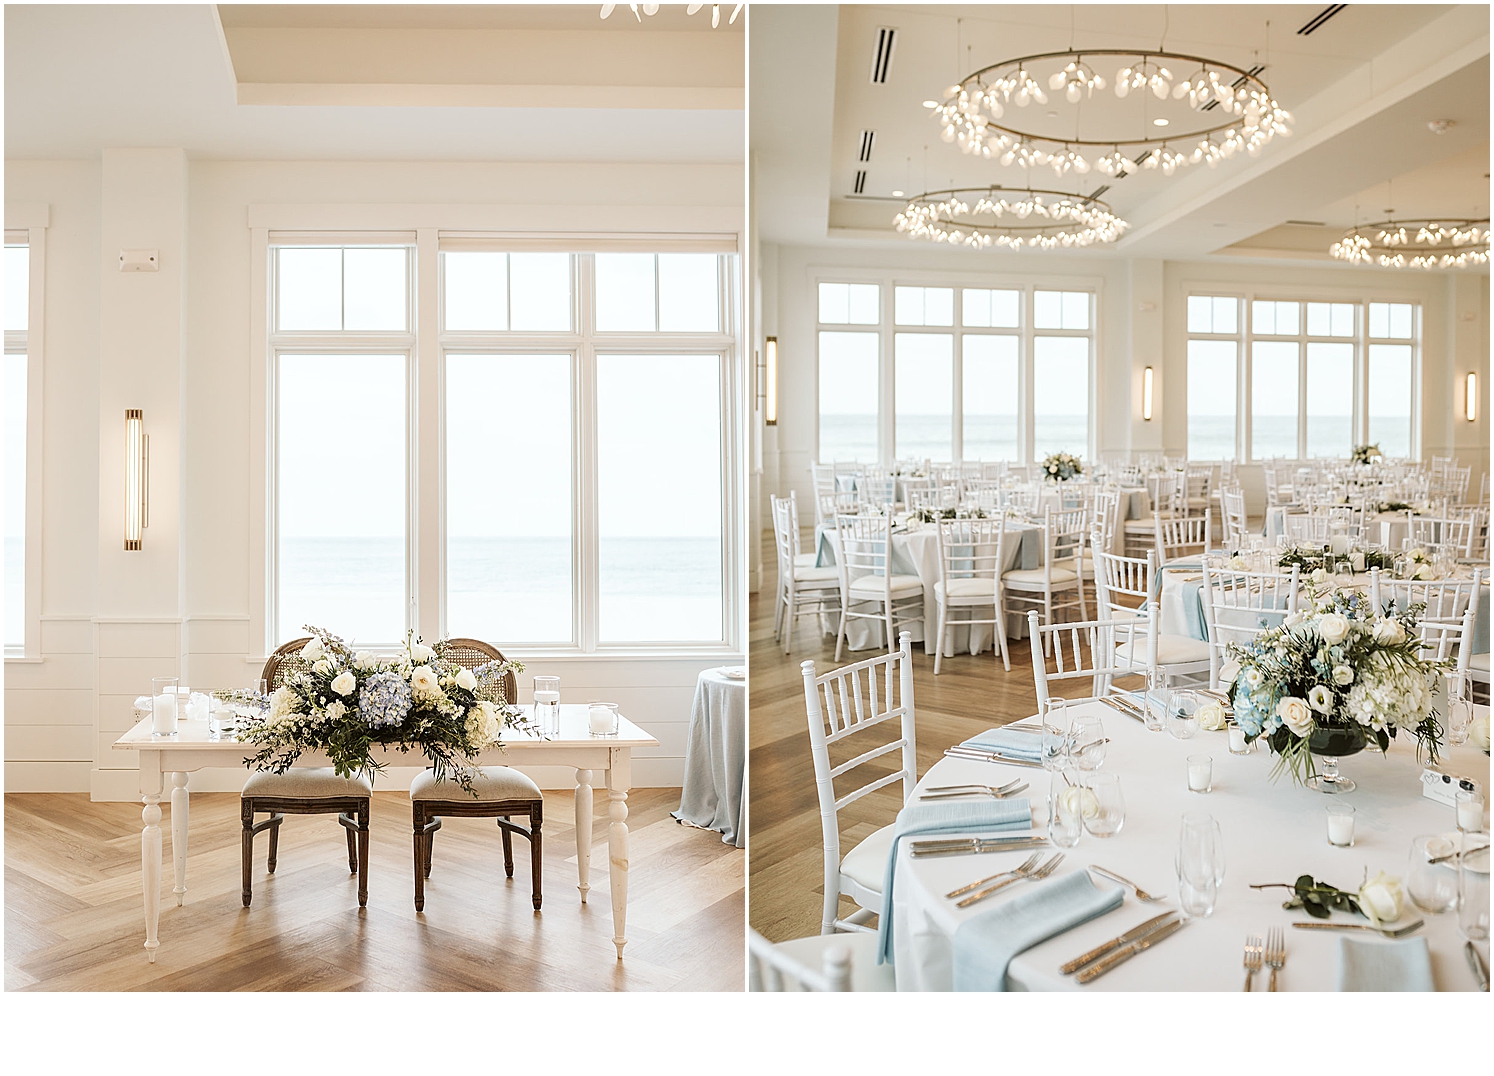 Sweetheart table and guest seating coastal wedding